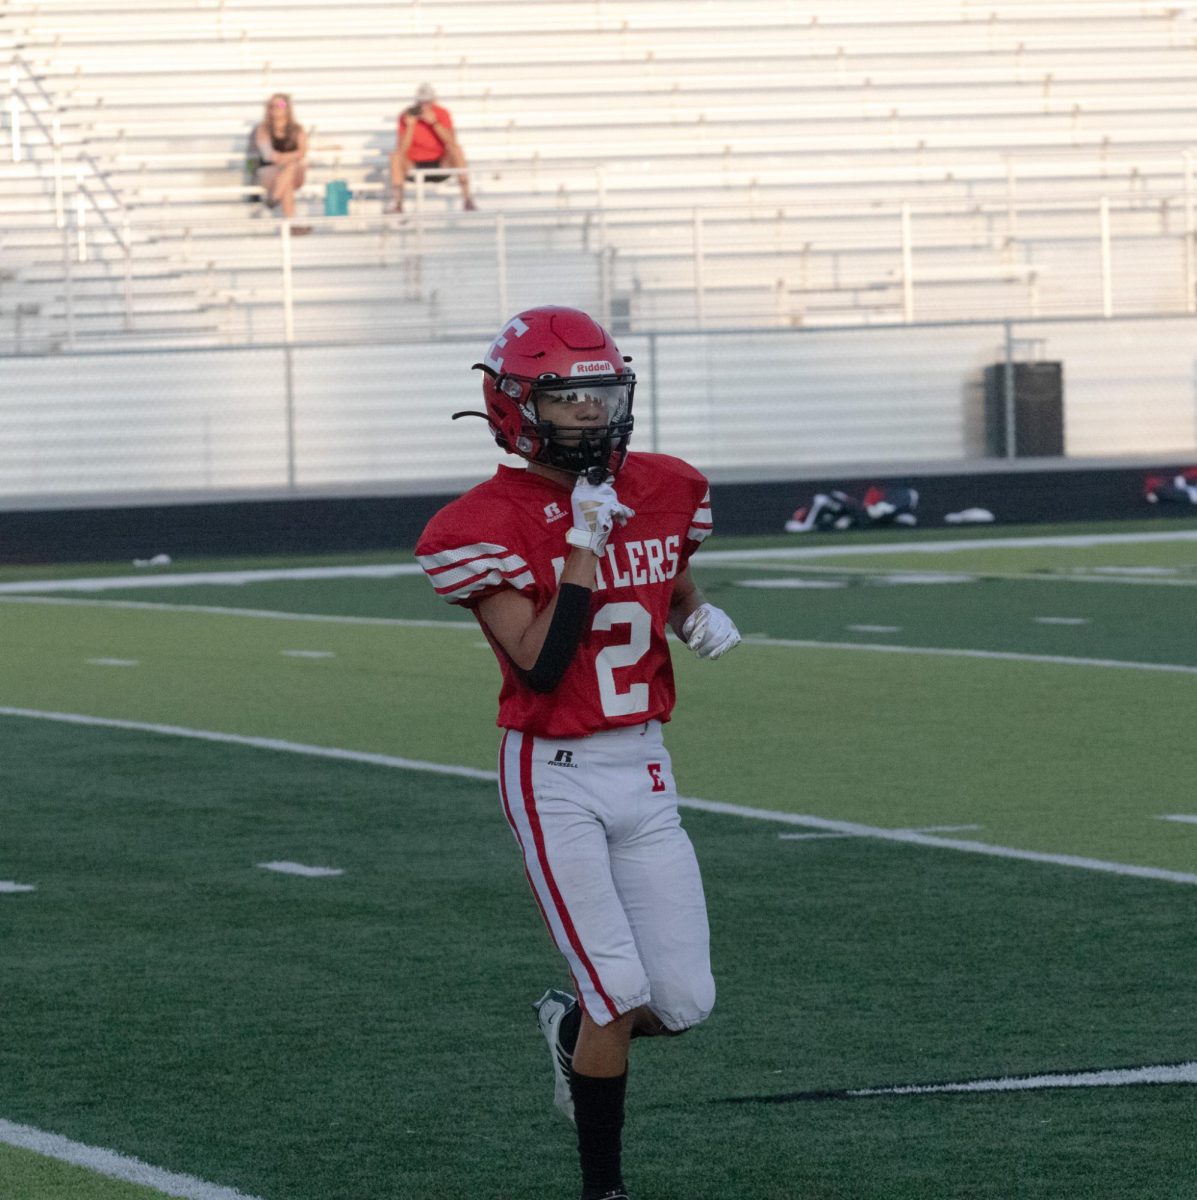 Freshman Cooper Sutton runs off the field after a play. Freshman Antlers lost 35-7 to Norris.                                                                                         